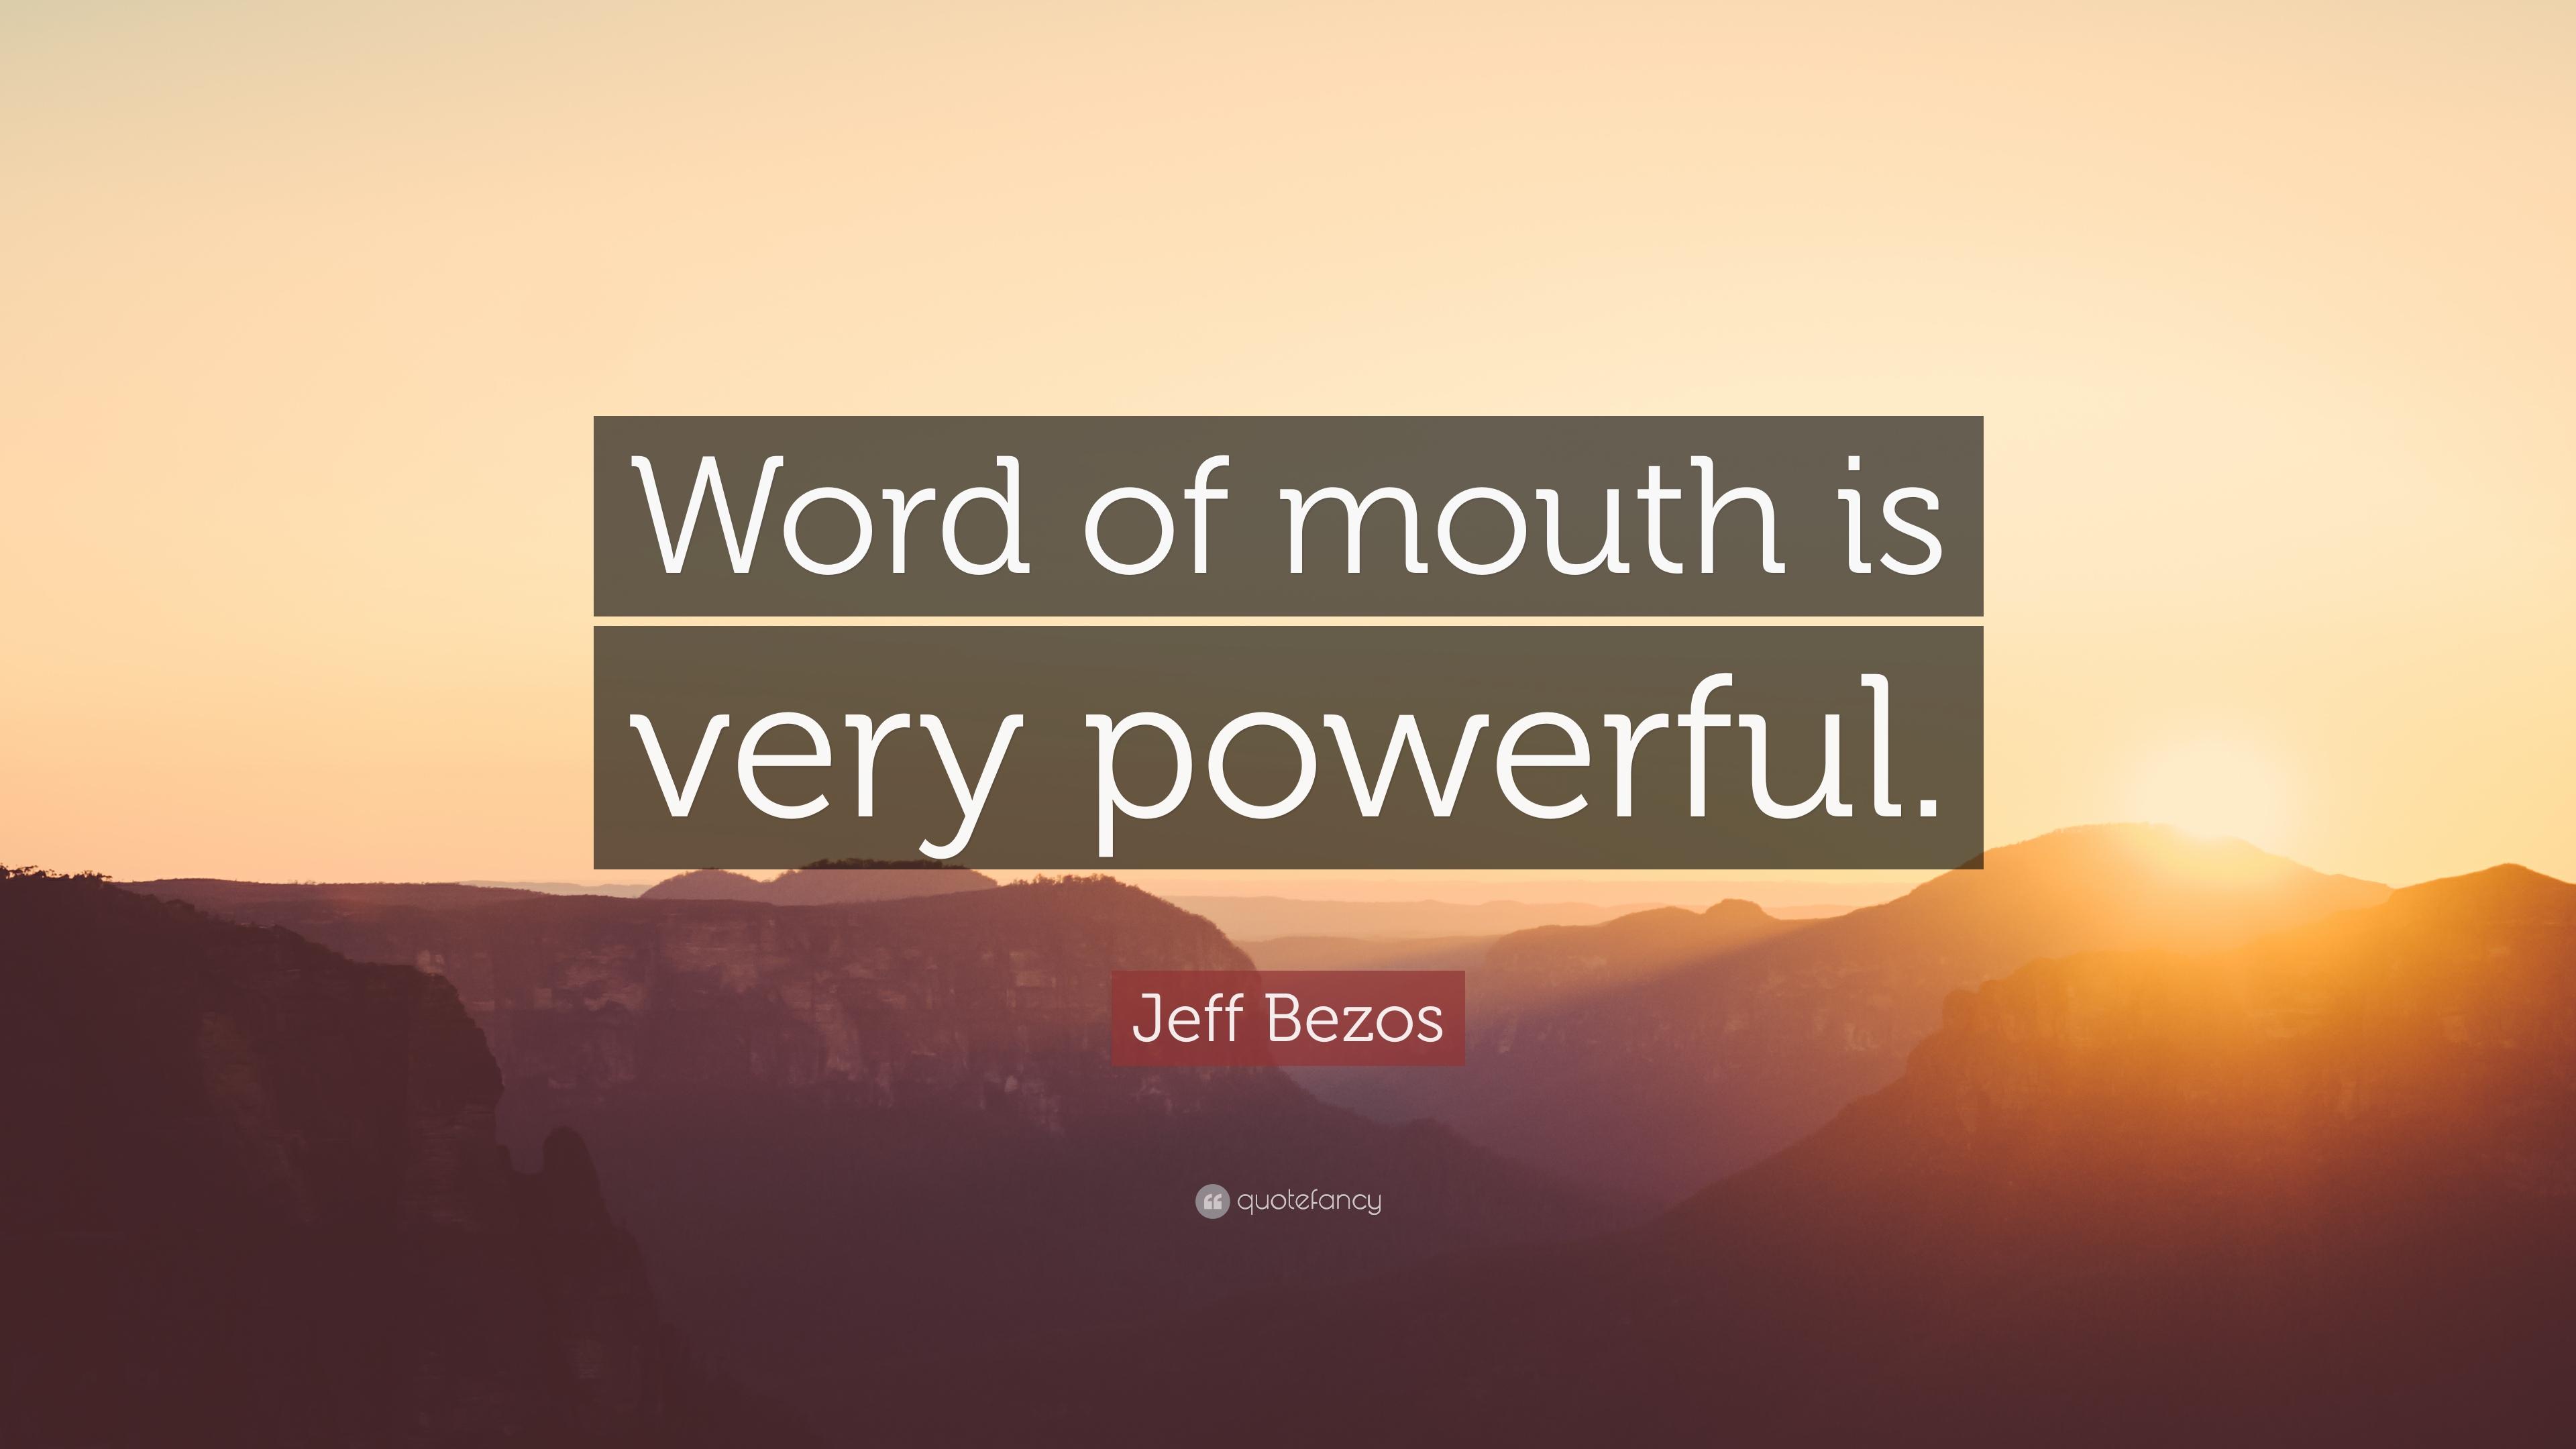 Jeff Bezos Quote: “Word of mouth is very powerful.” 12 wallpaper